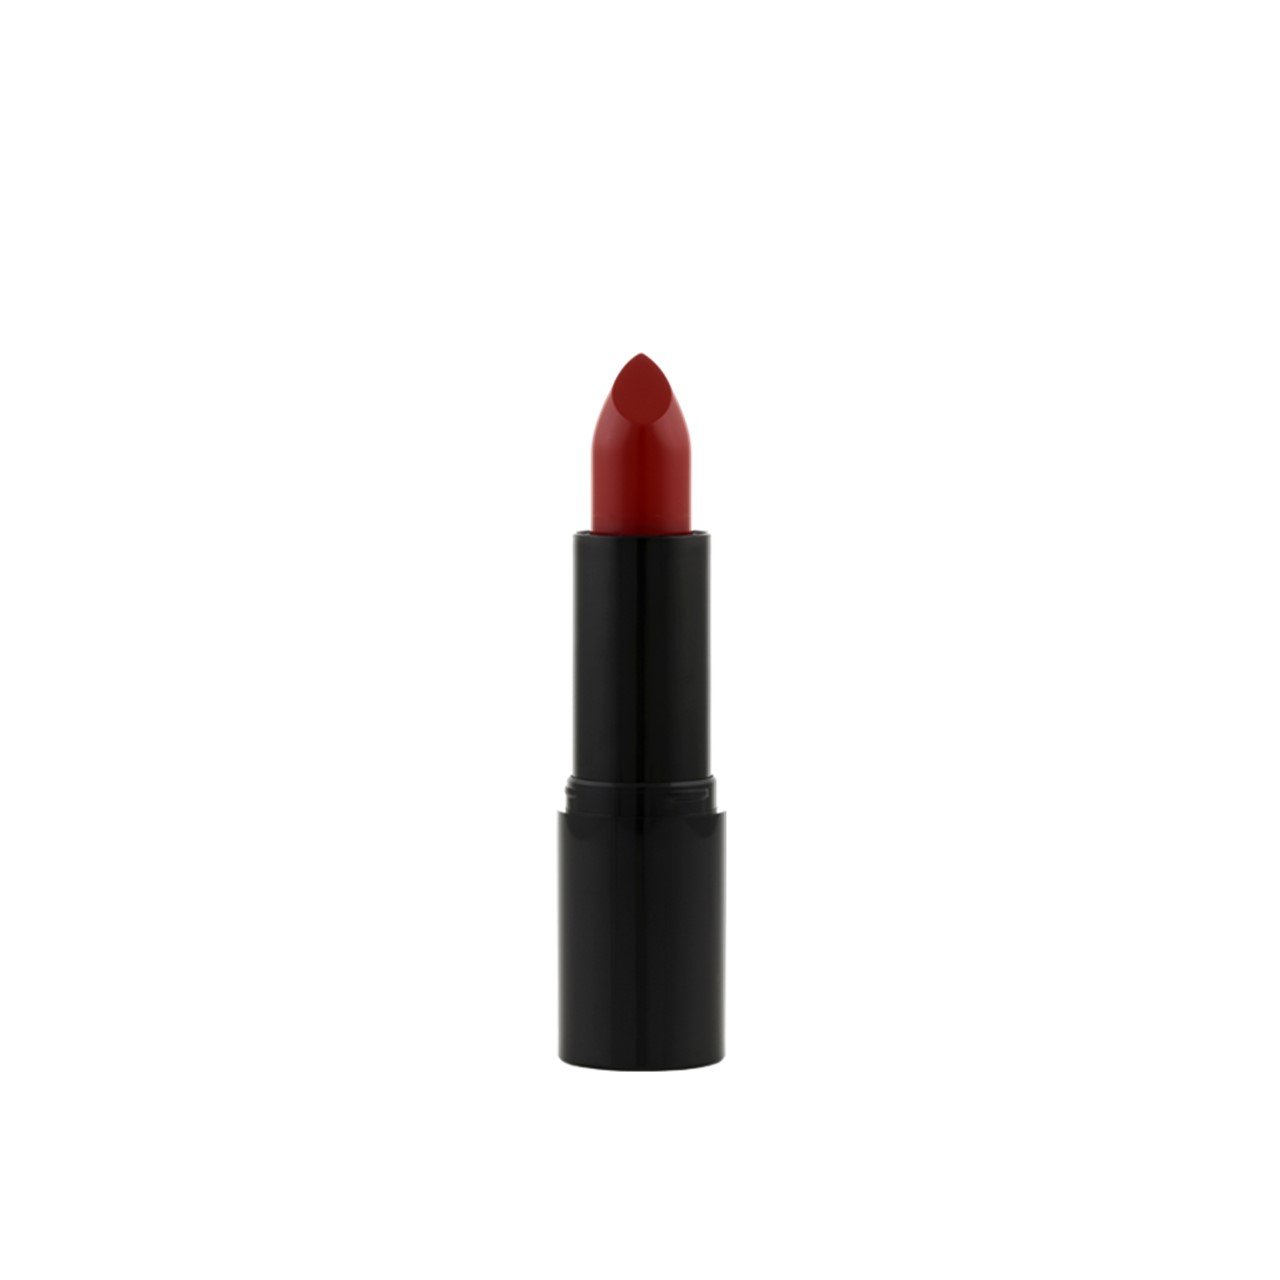 Skinerie Lips Lipstick 10 Late Night Rouge 3.5g (0.12oz)